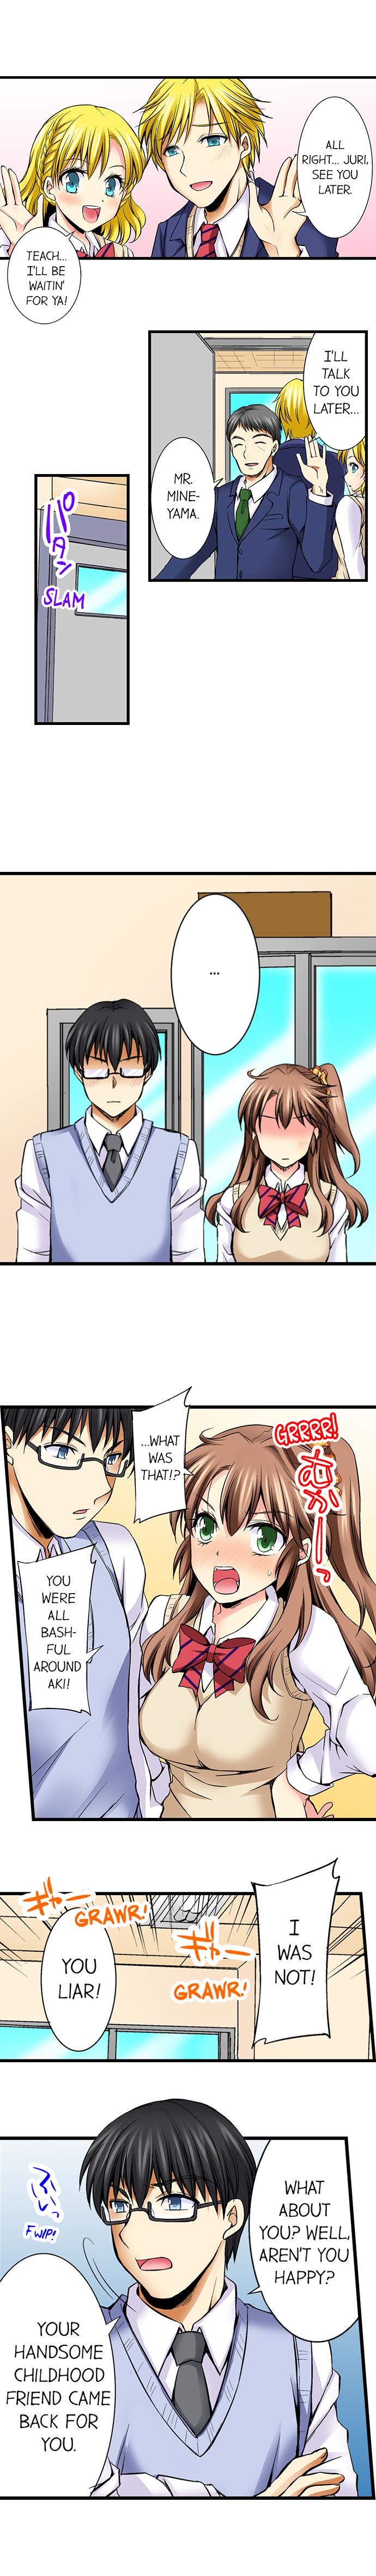 Why Can't i Have Sex With My Teacher? - Chapter 19 Page 6